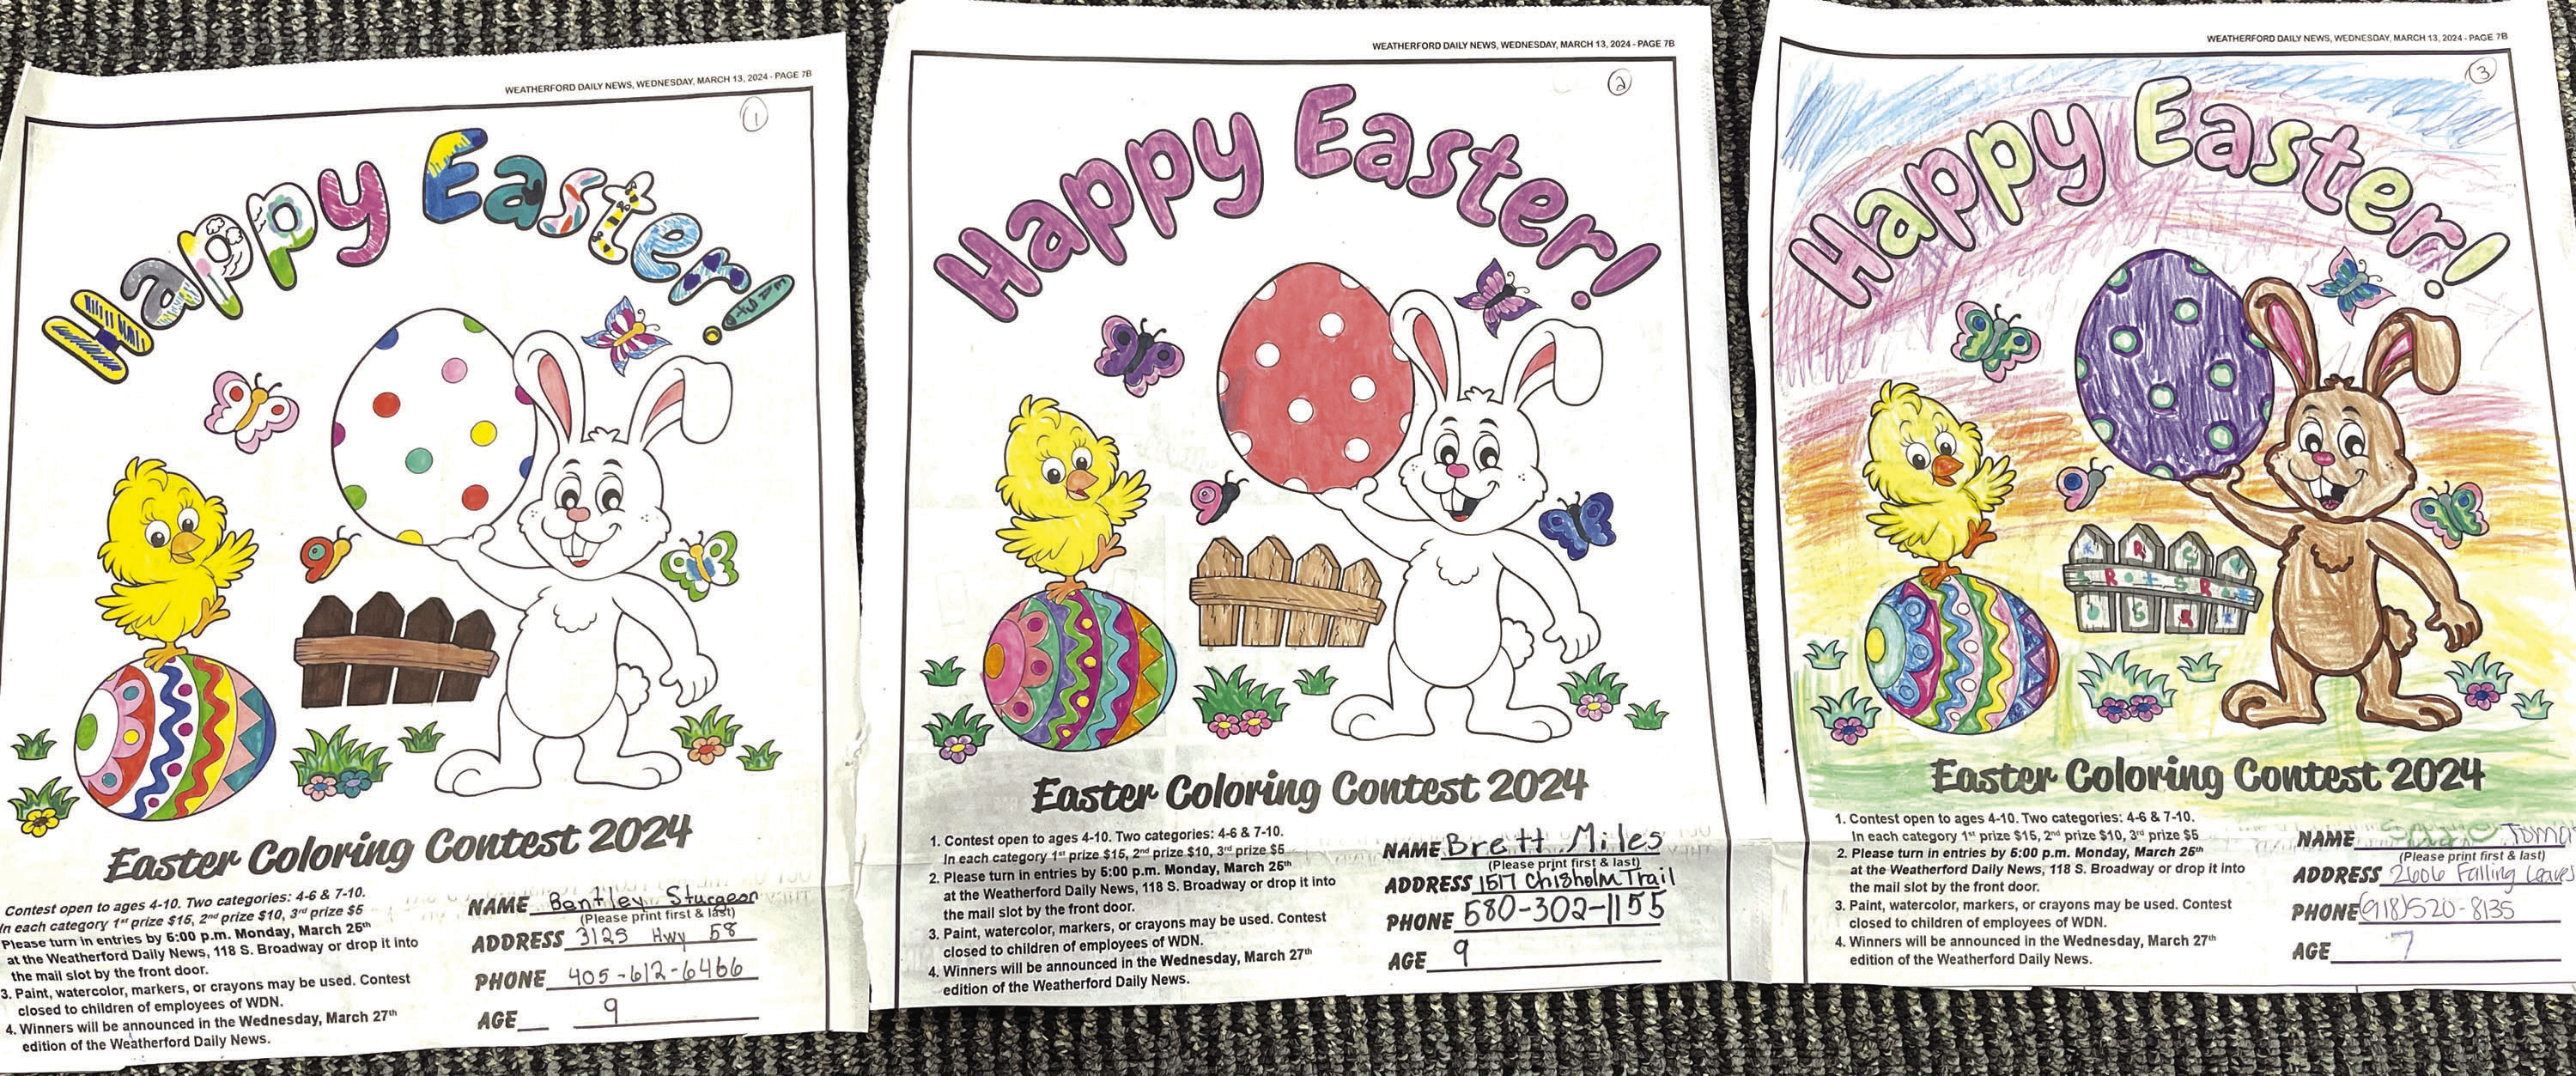 Easter WDN Coloring Contest winners age 7-10 are: 1st place- Bentley Sturgeon 2nd place- Brett Miles 3rd places- Sadie Tomasi